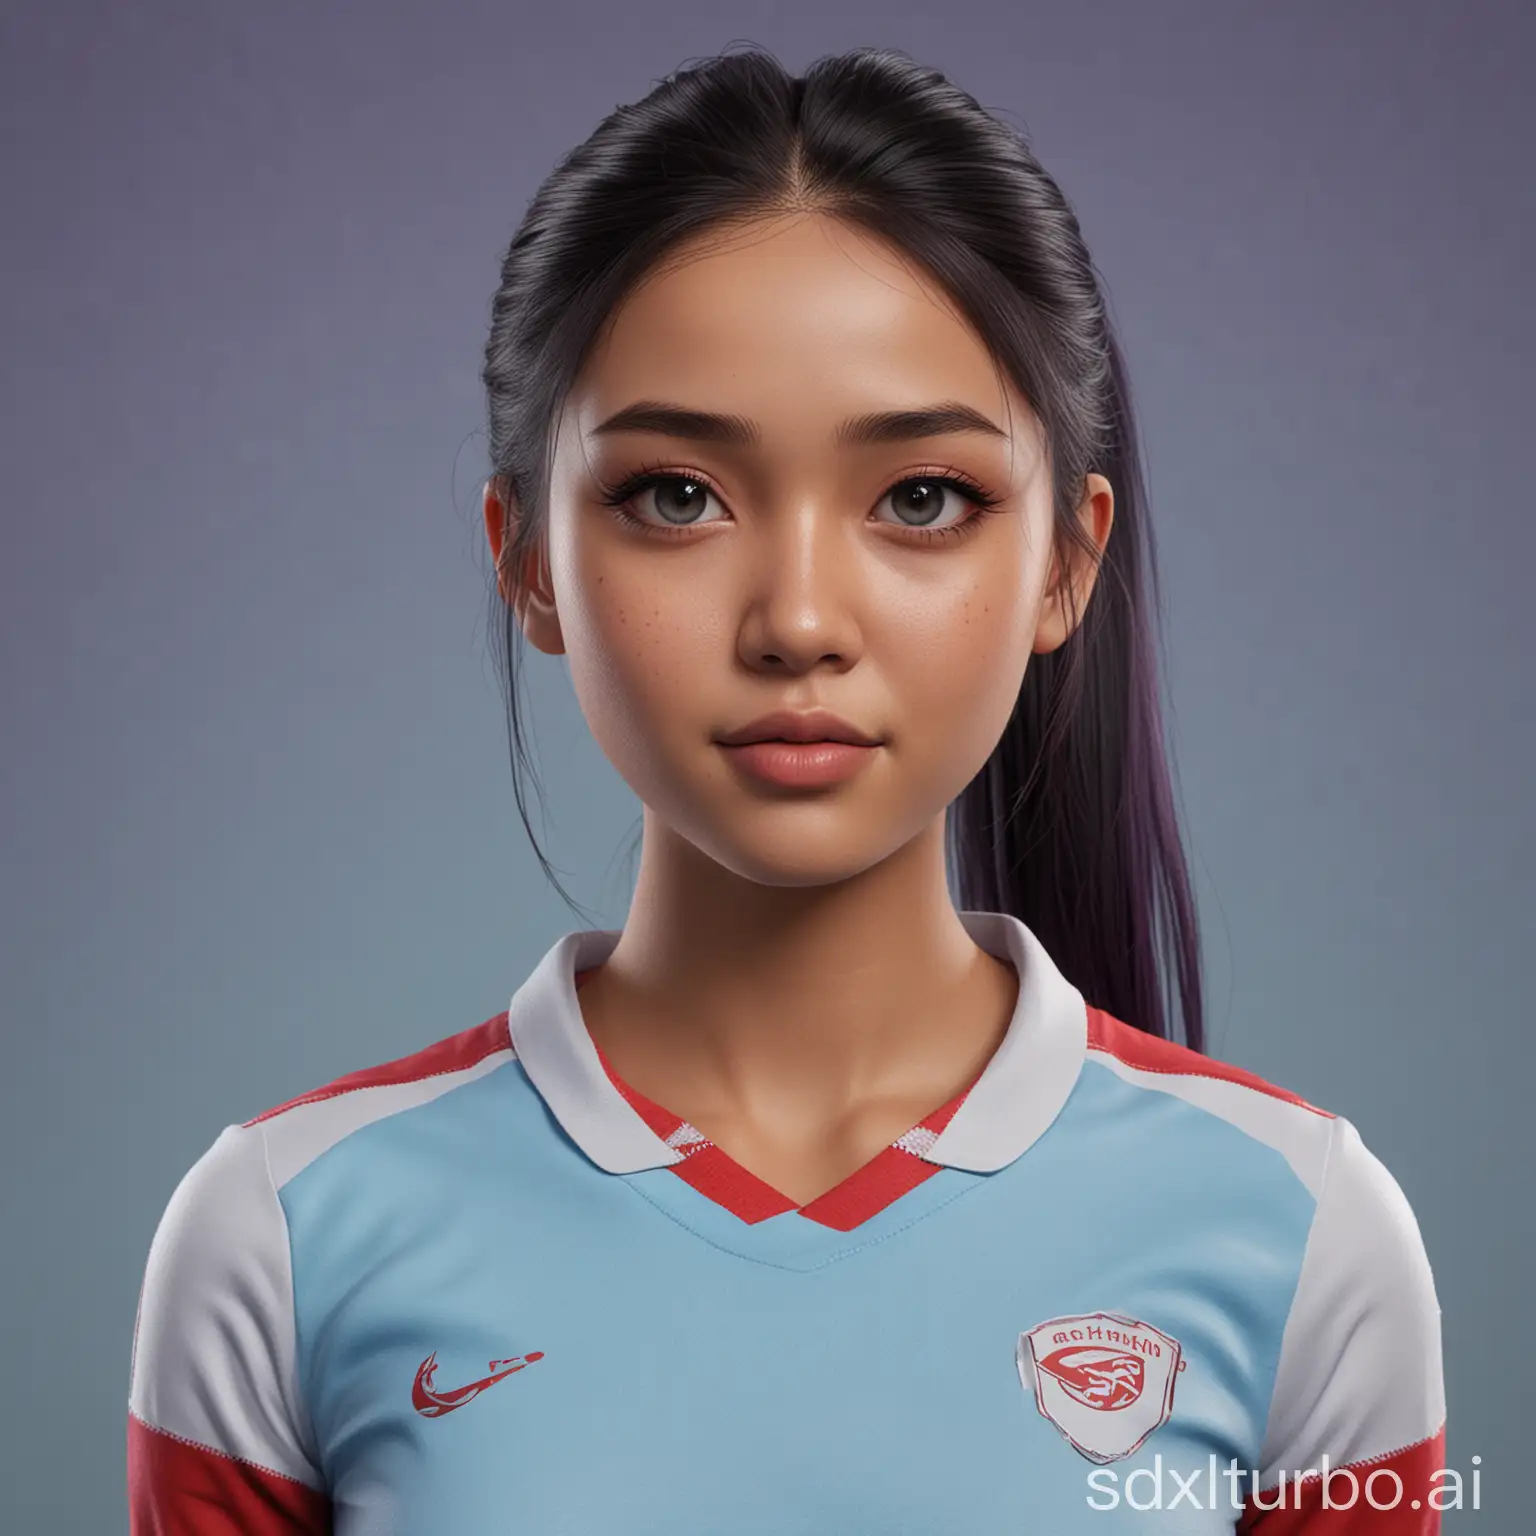 Realistic-3D-Animation-of-Indonesian-Woman-in-Sports-Jersey-with-Ponytail